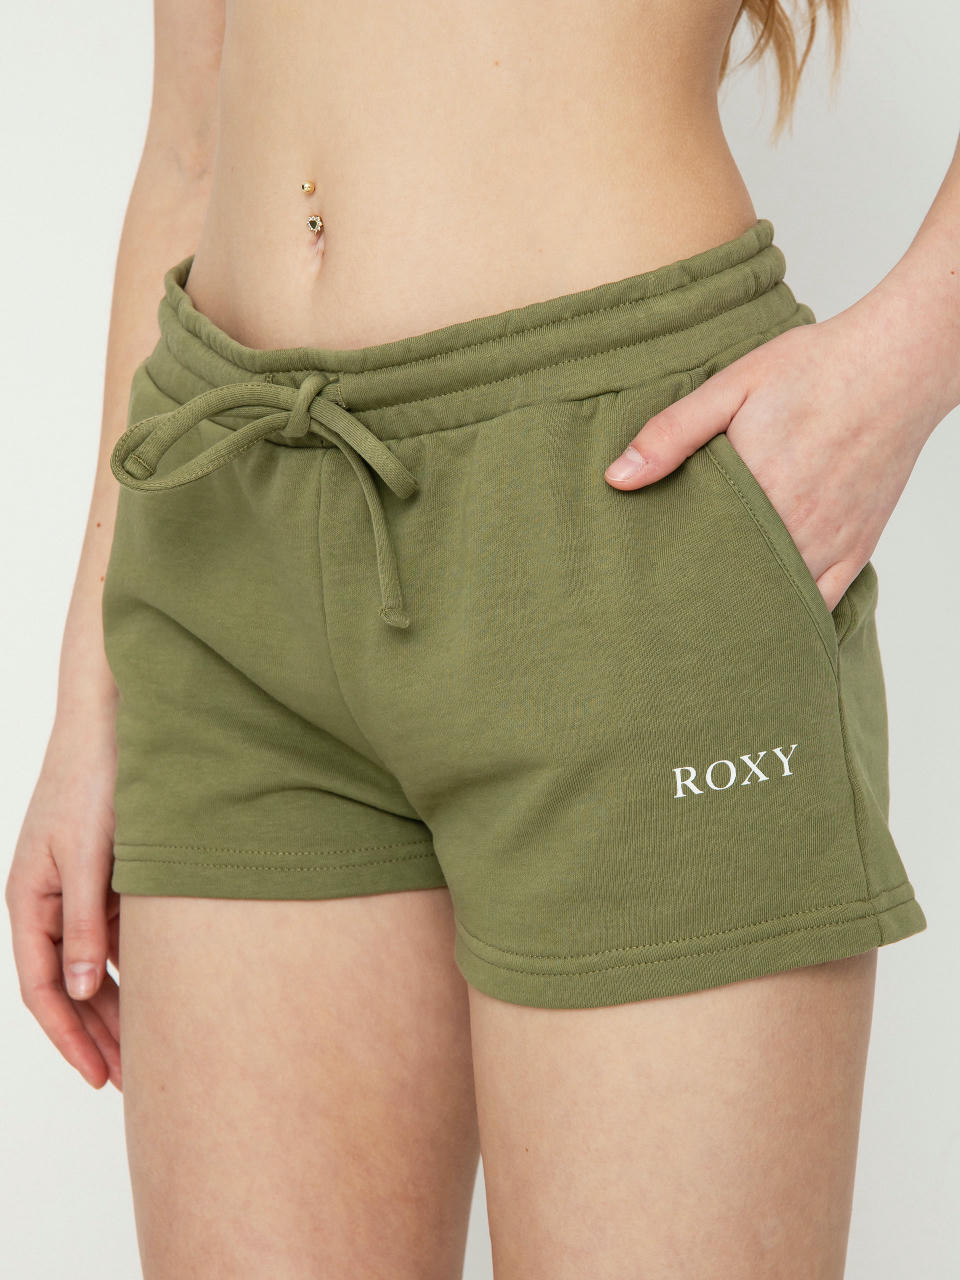 Roxy Surf Stoked Shorts Wmn (loden green)